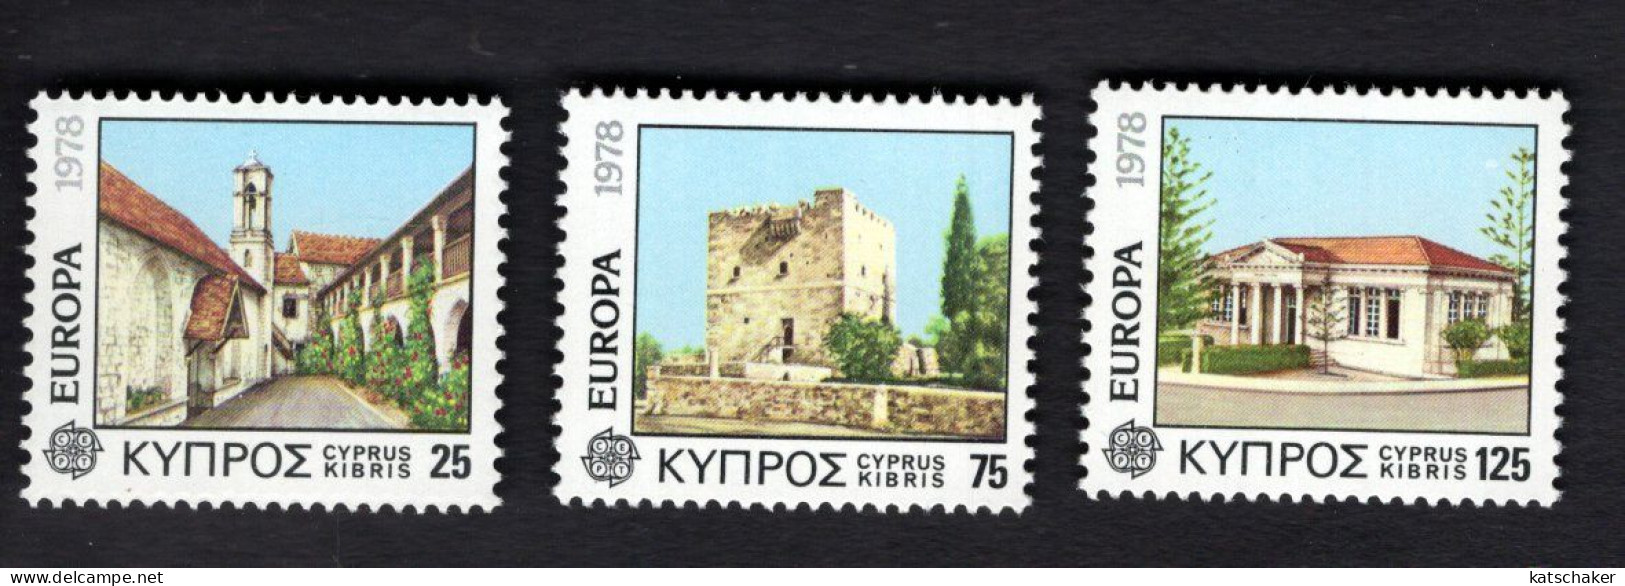 2024718977 1978 SCOTT 495 497  (XX) POSTFRIS MINT NEVER HINGED - EUROPA ISSUE - ARCHITECHURE - Unused Stamps